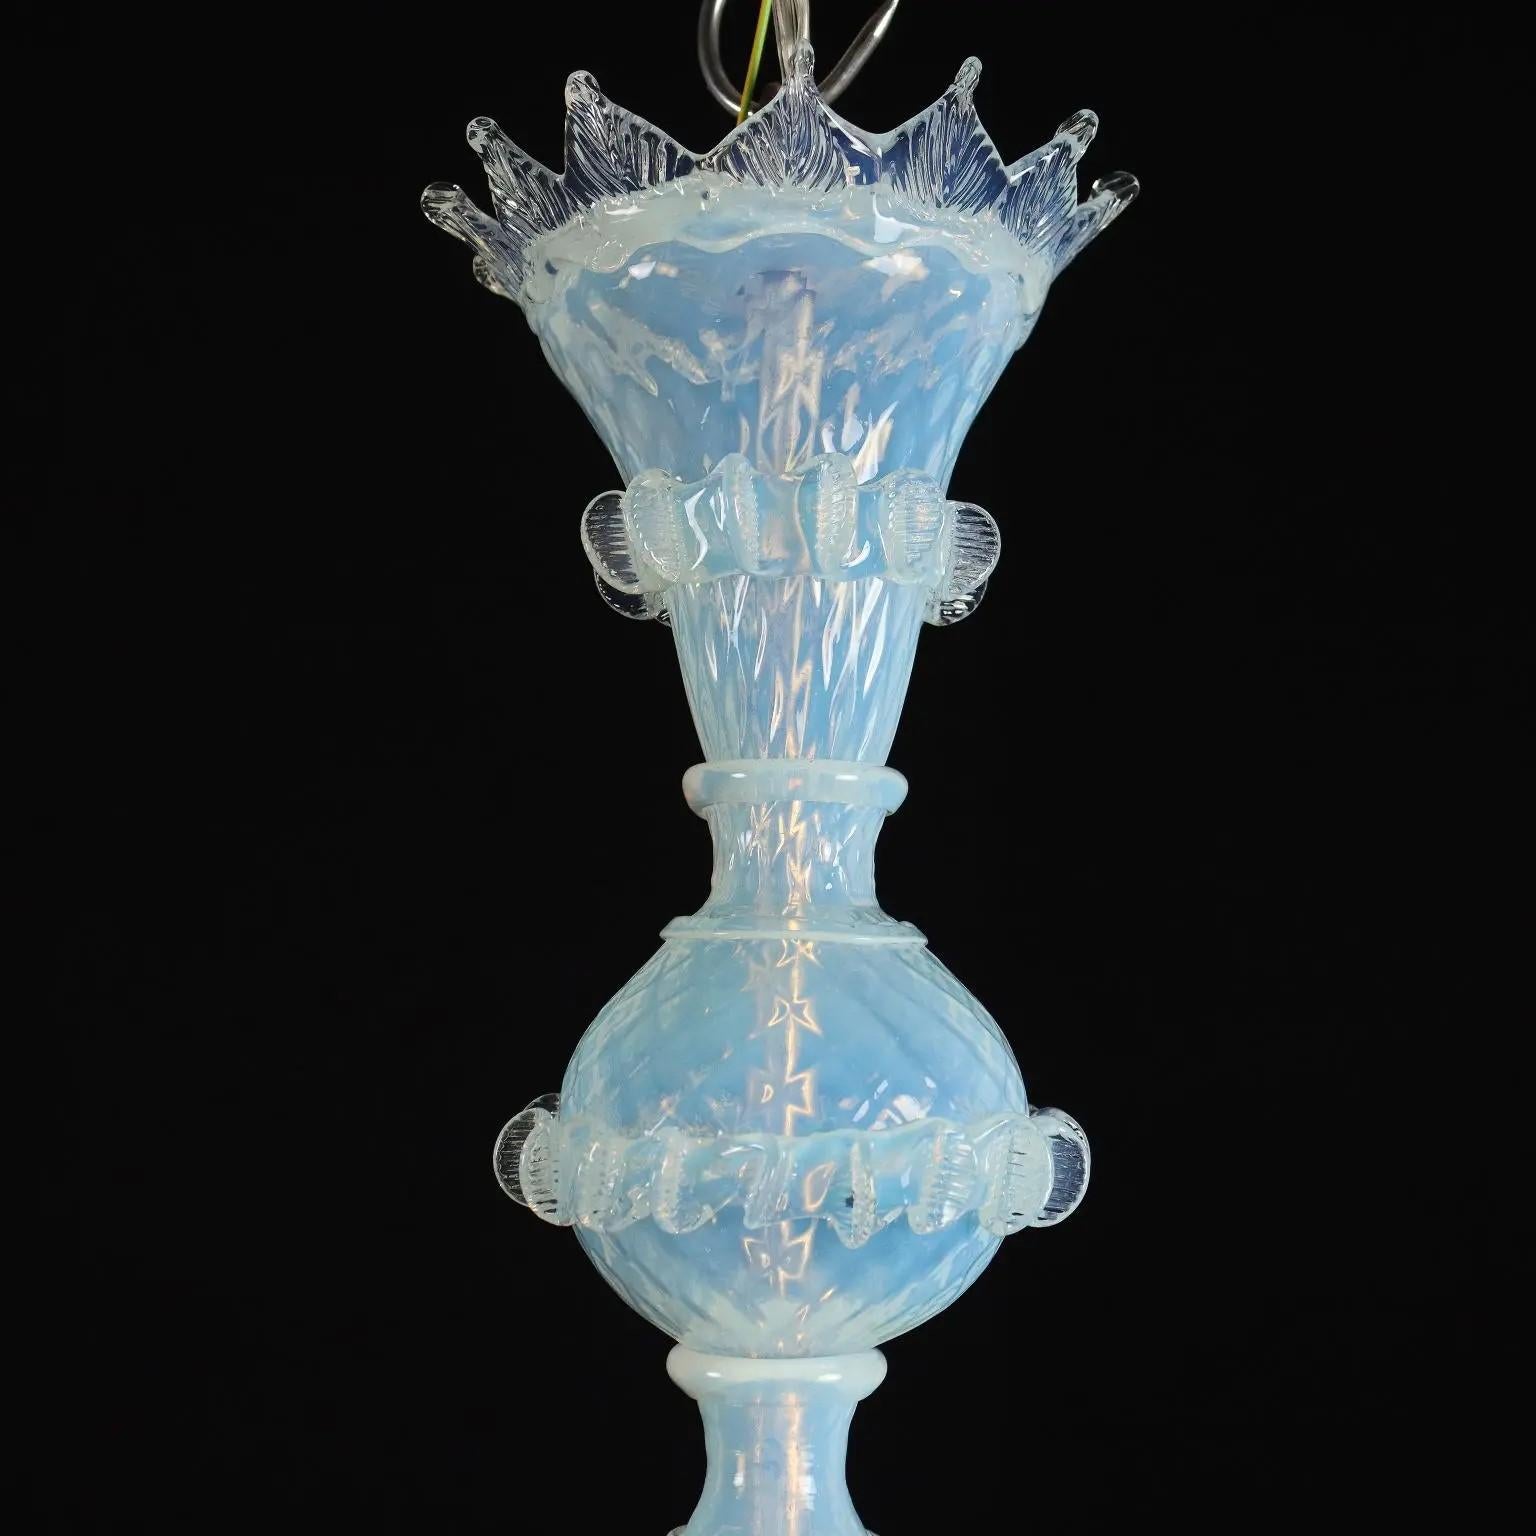 The blown glass standard of ball form resting on a glass baluster issuing six scrolling arms holding candle cups and lights above a cut glass dish 